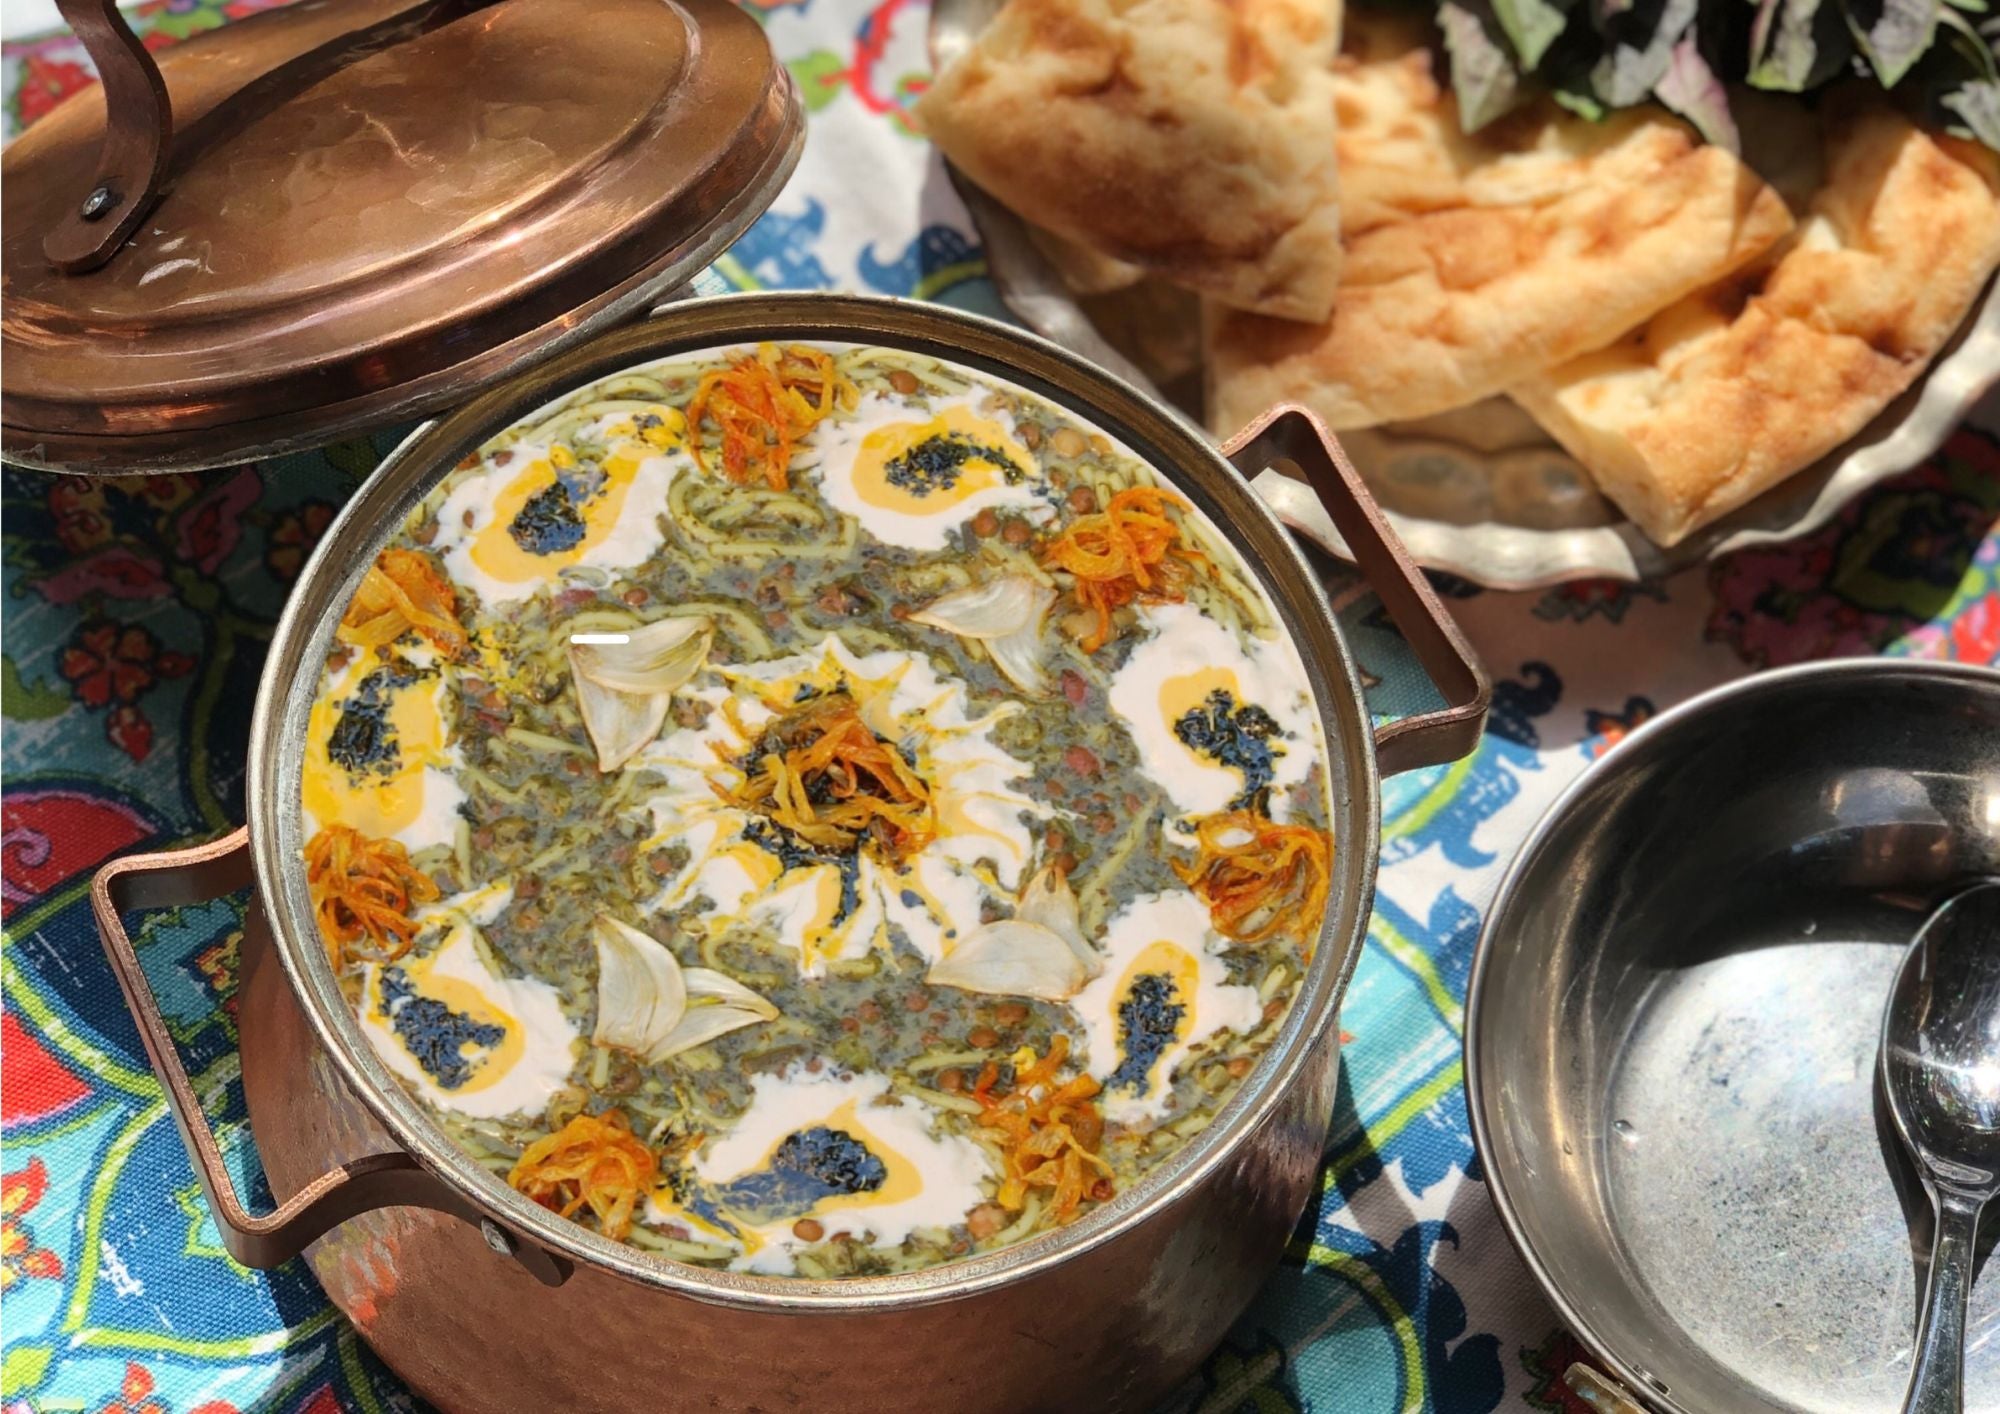 Persian Herb And Noodle Soup - Aash Reshteh